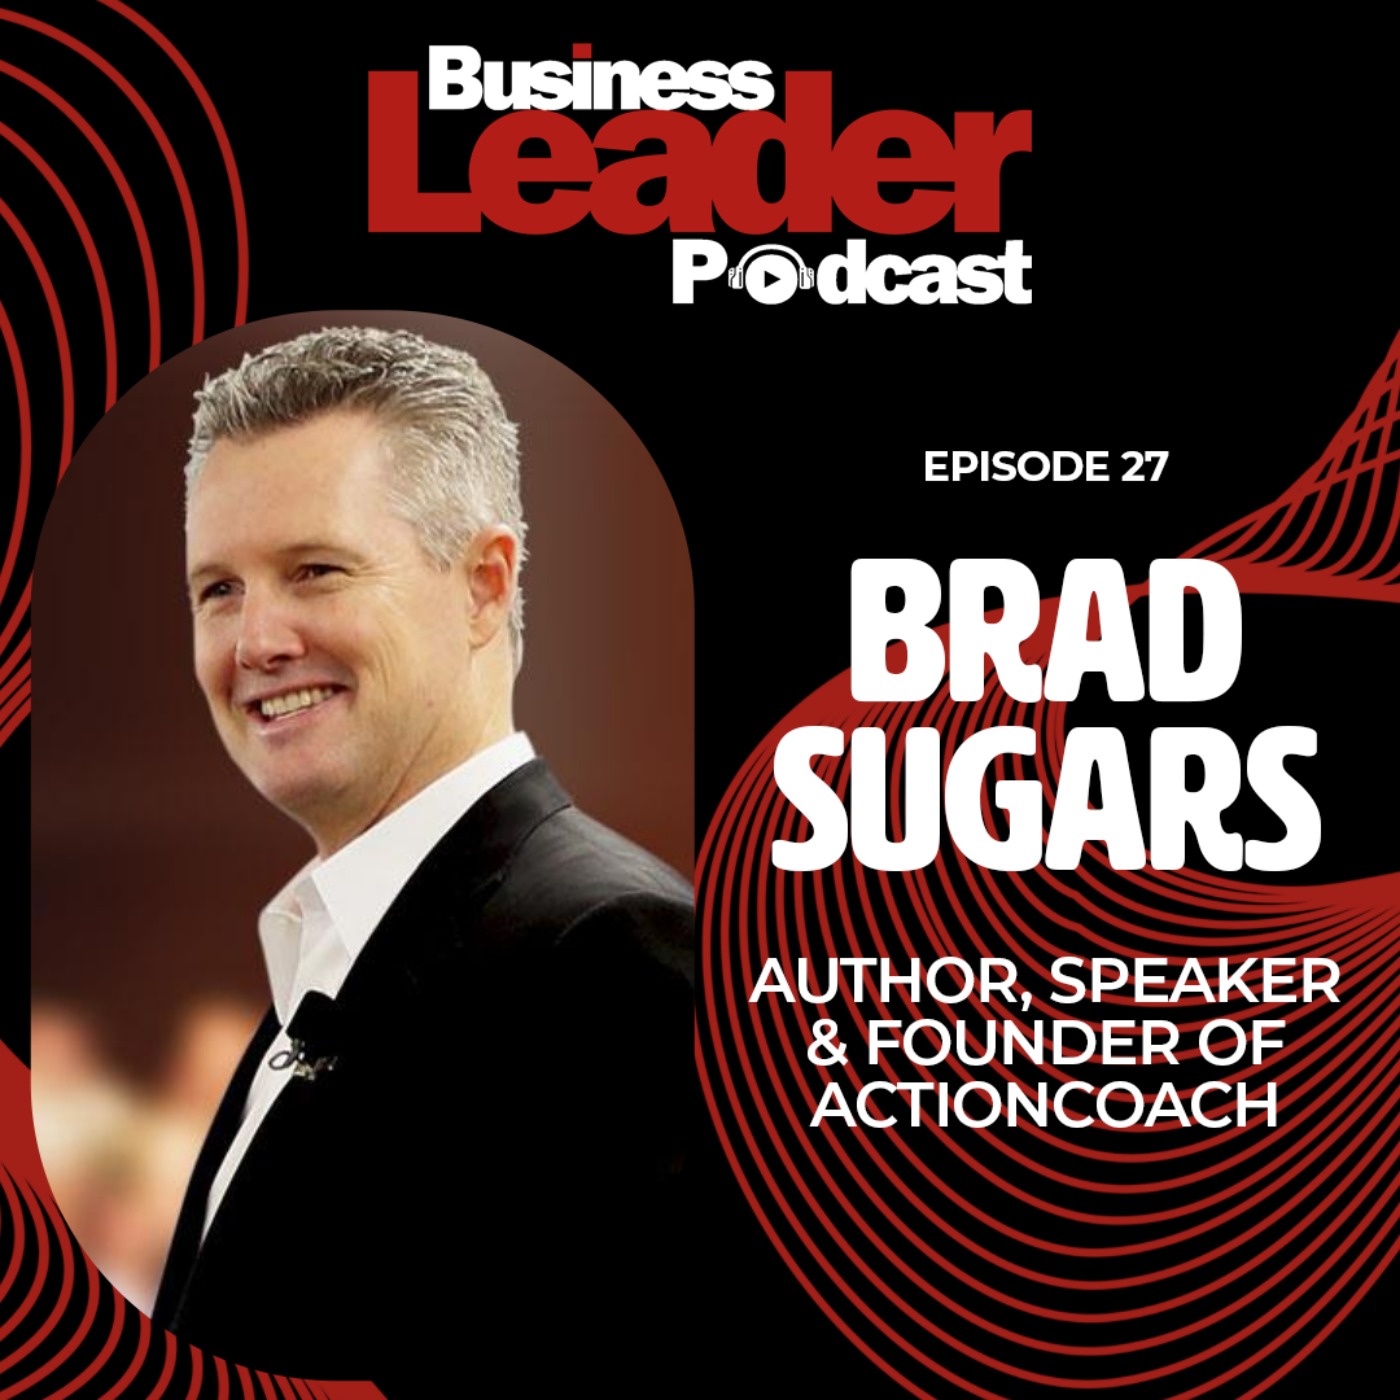 Brad Sugars: author, speaker & founder of ActionCOACH